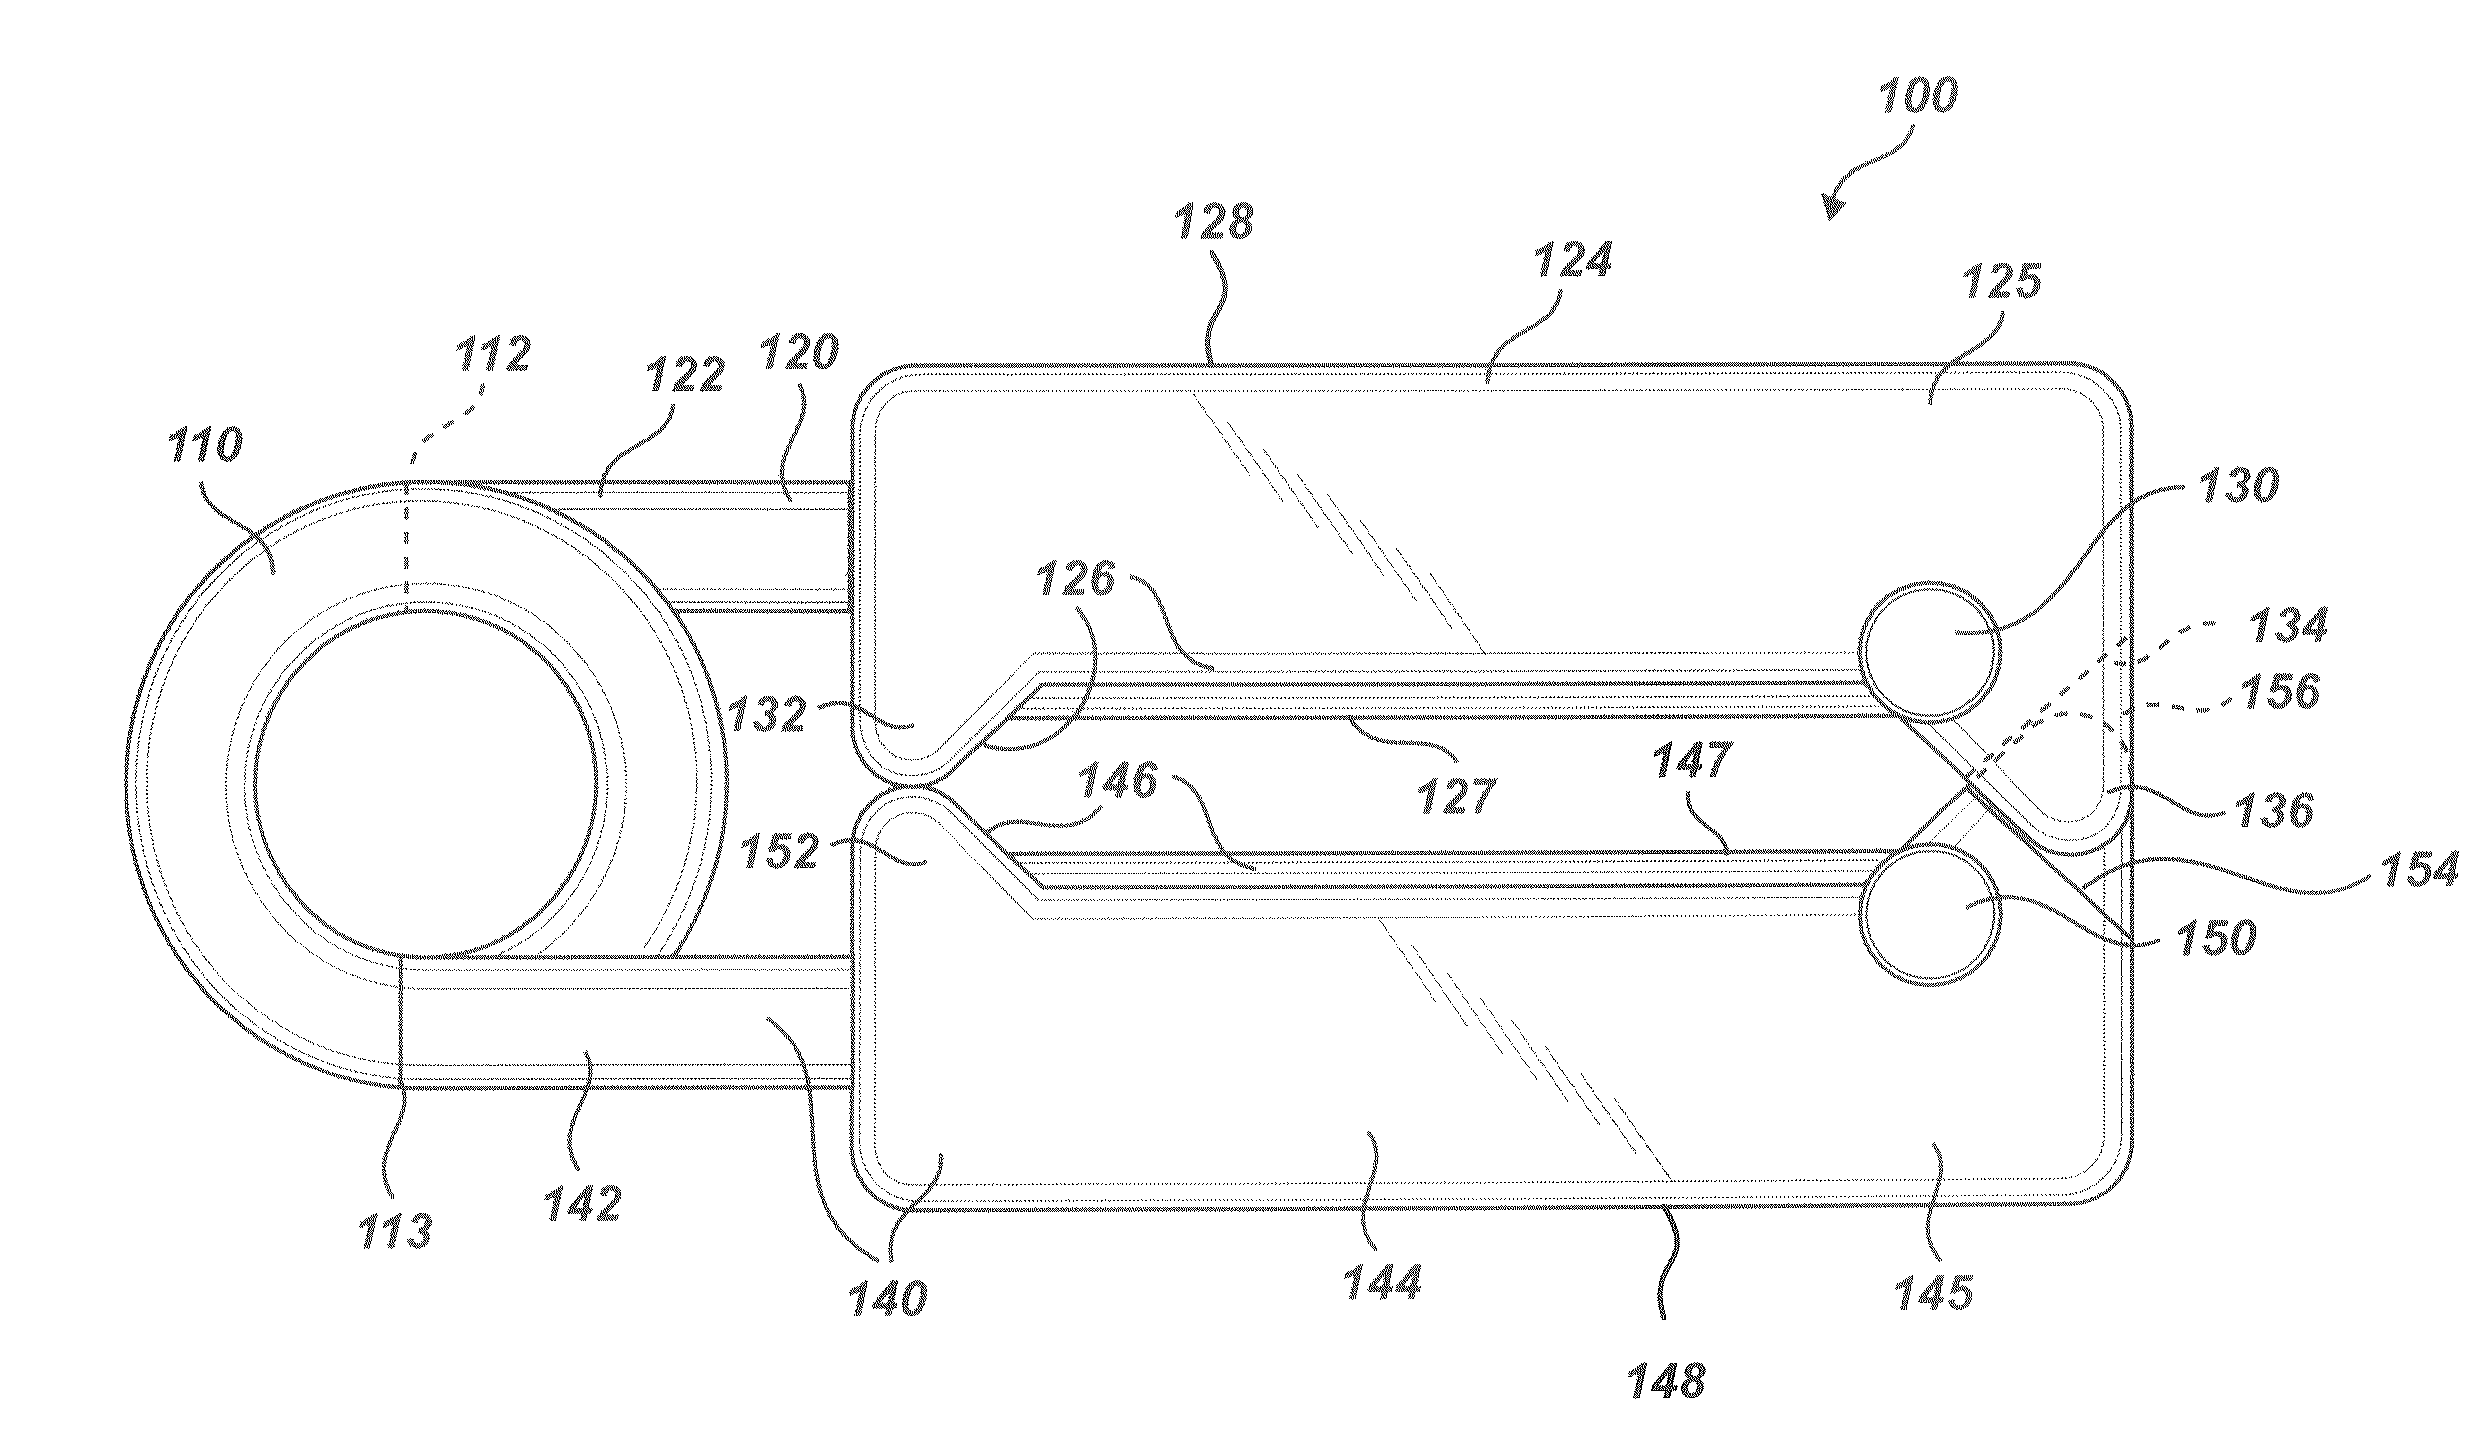 Vessel Occlusion Clip and Application Thereof